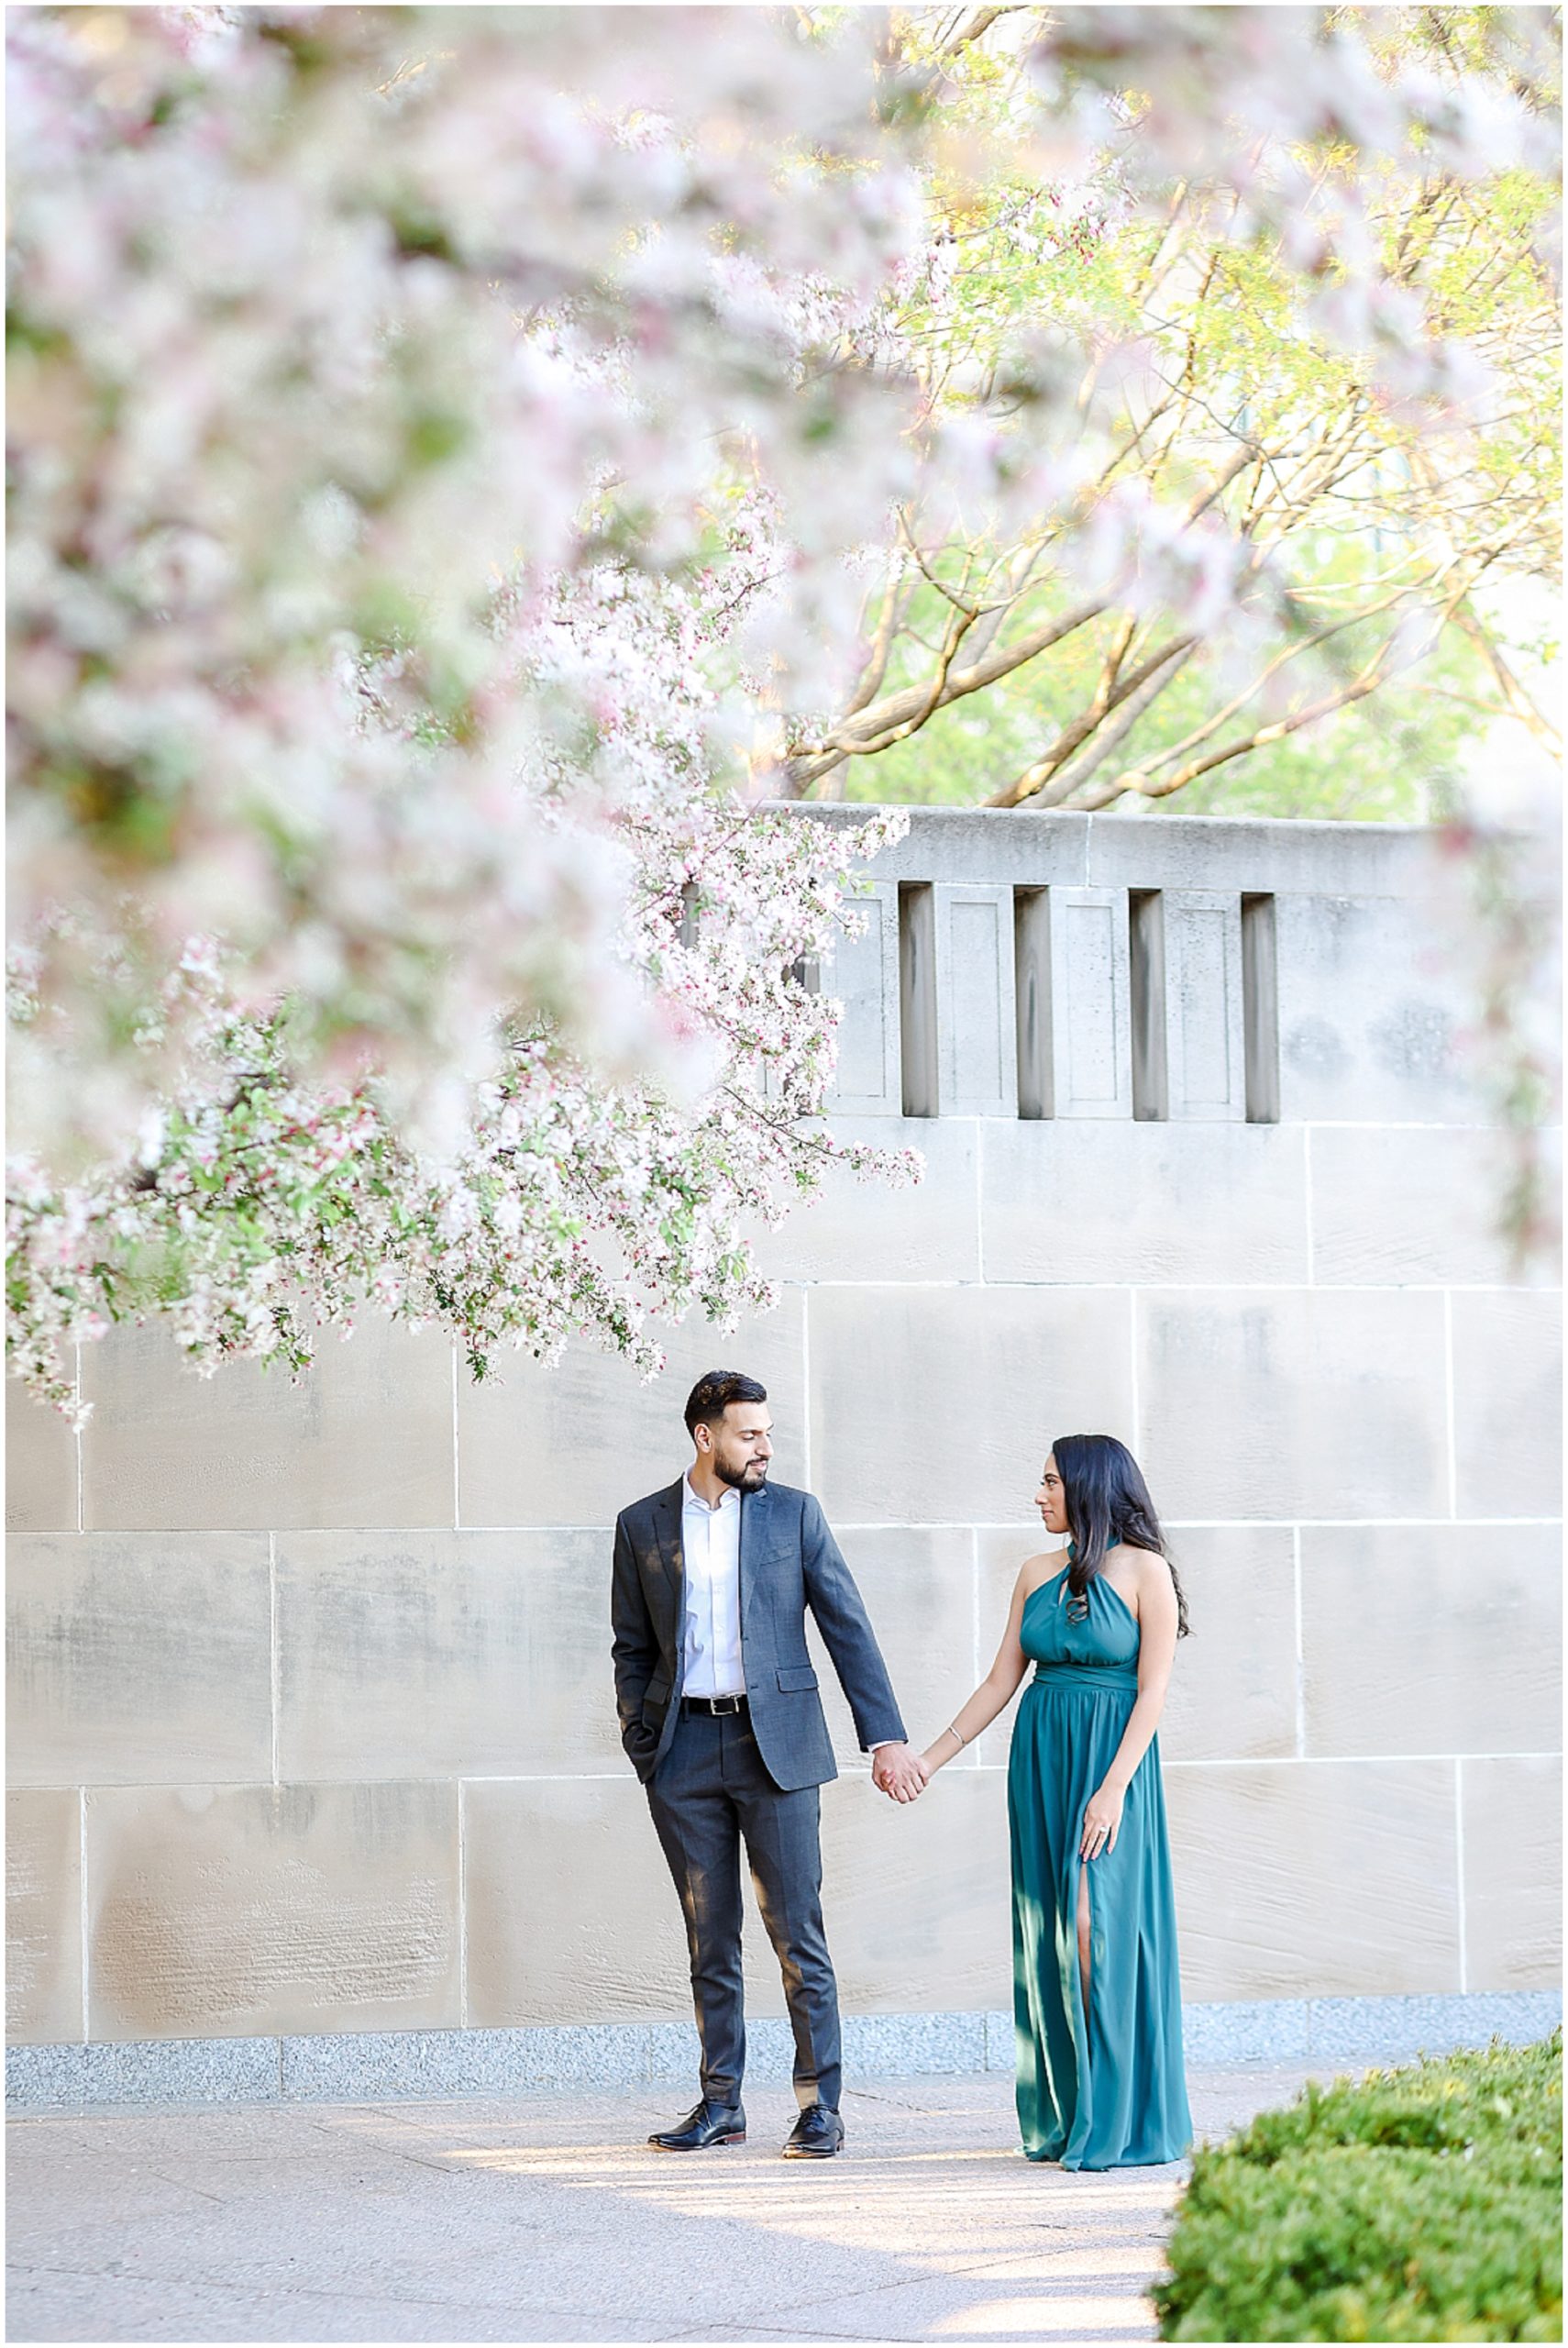 Fusion Indian Engagement Photos at Kansas City Nelson Atkins Museum for Bryant & Kaman - Mariam Saifan Photography - Where to take Engagement Photos - What to Wear to Engagement Session - Style Guide - Best Indian Wedding Photography Kansas City and STL 